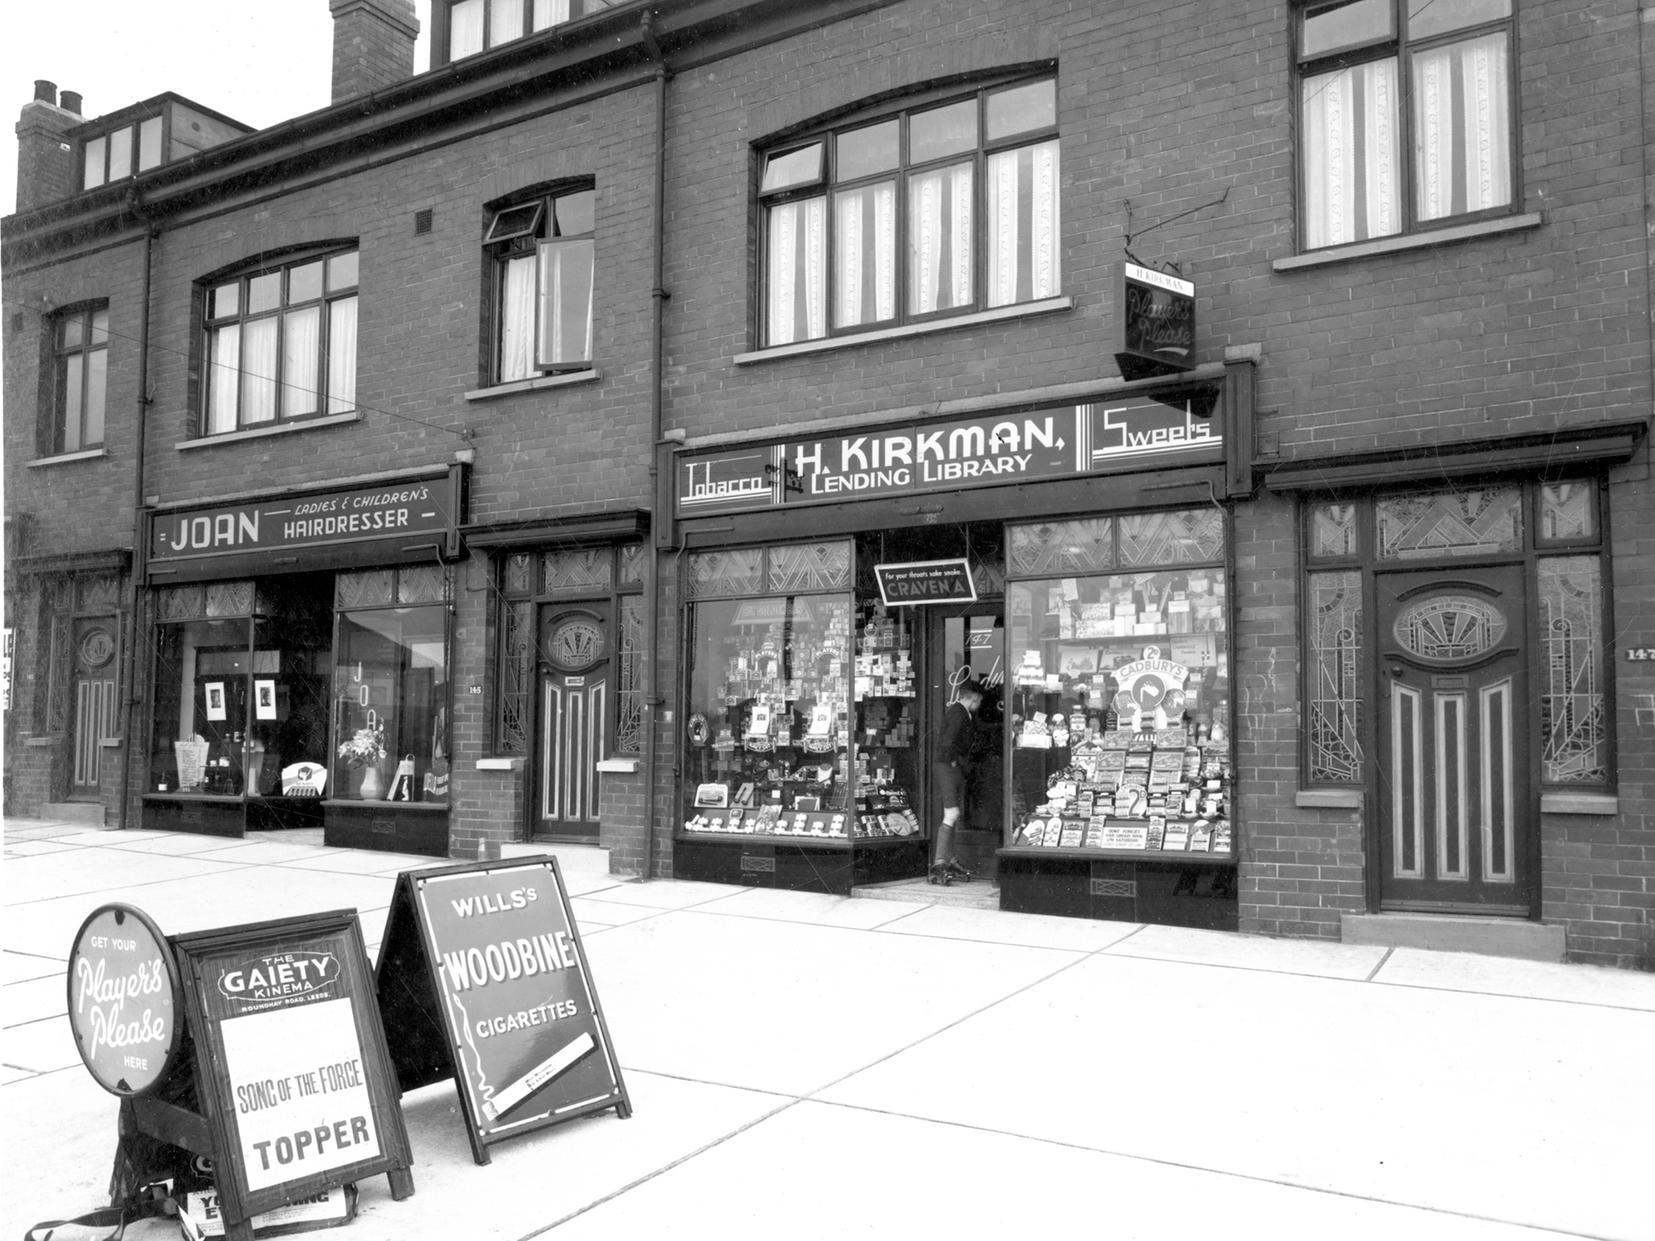 Gipton's Easterly Road which was the business premises of H. Kirkman, Tobacconist, Confectioner, Lending Library and  Joan's Ladies and Children's Hairdressers.